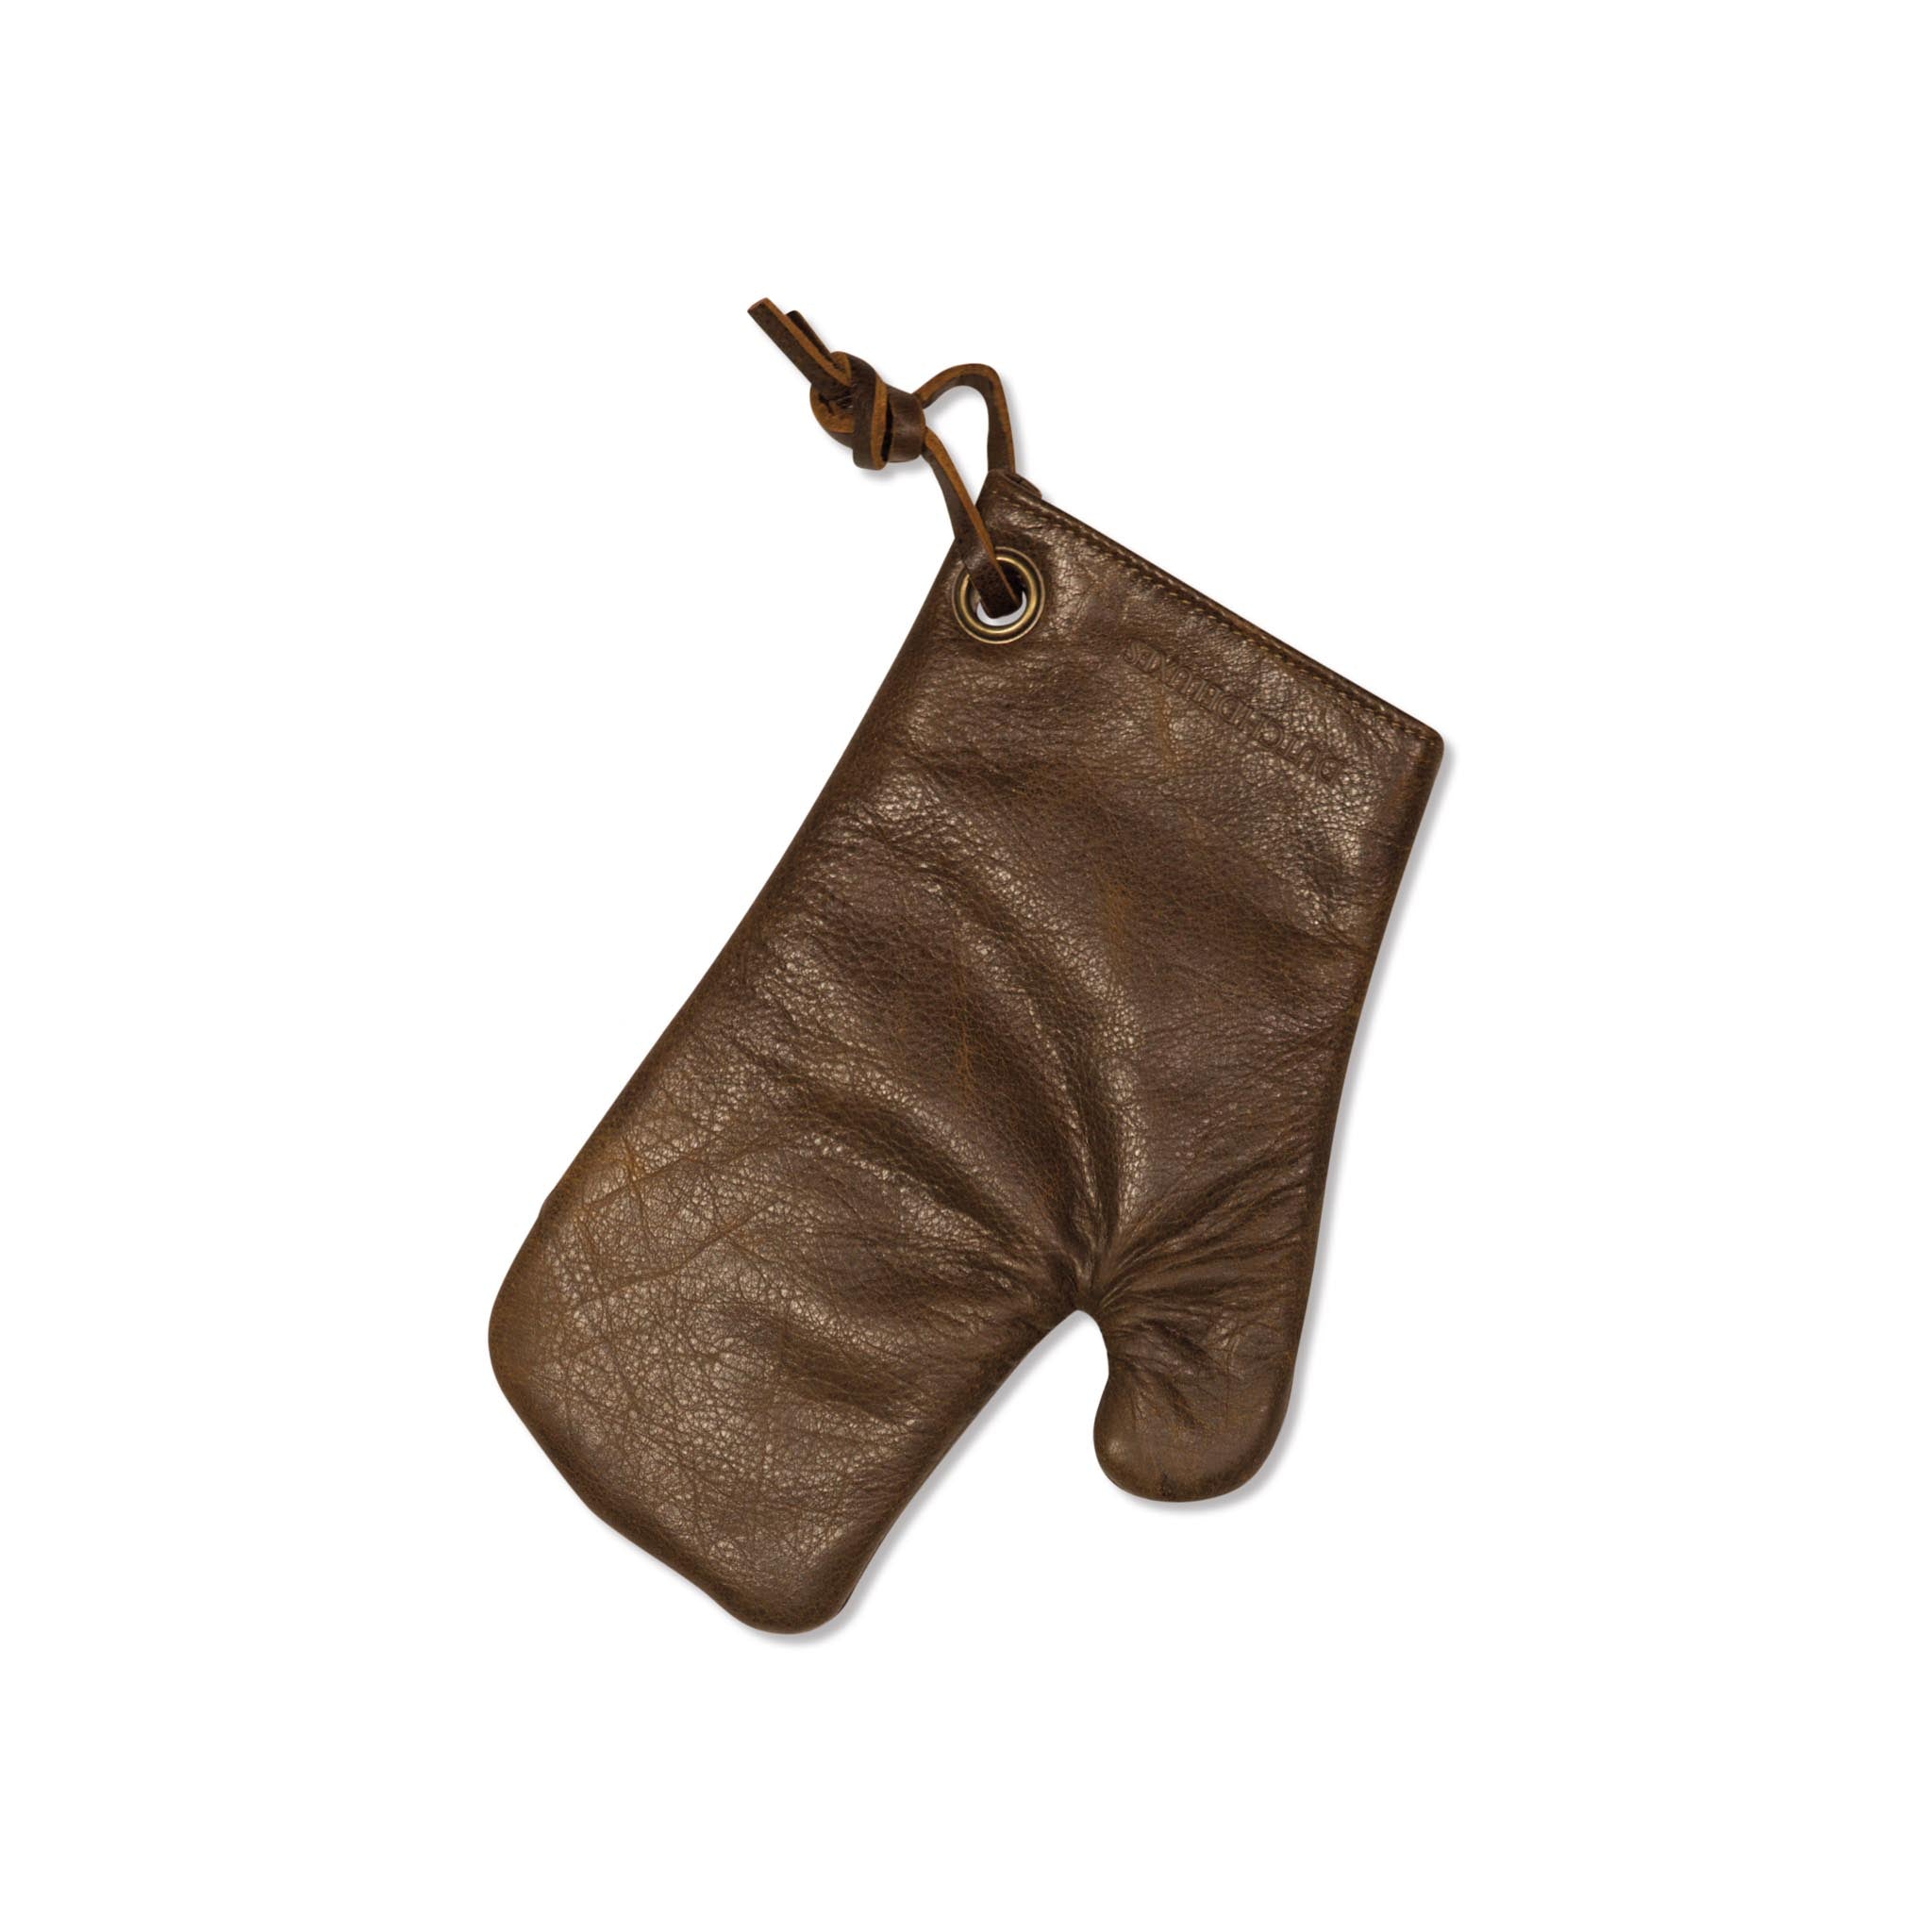 Dutchdeluxes Leather Oven Glove in Vintage Brown Cookware Kitchen Clothing